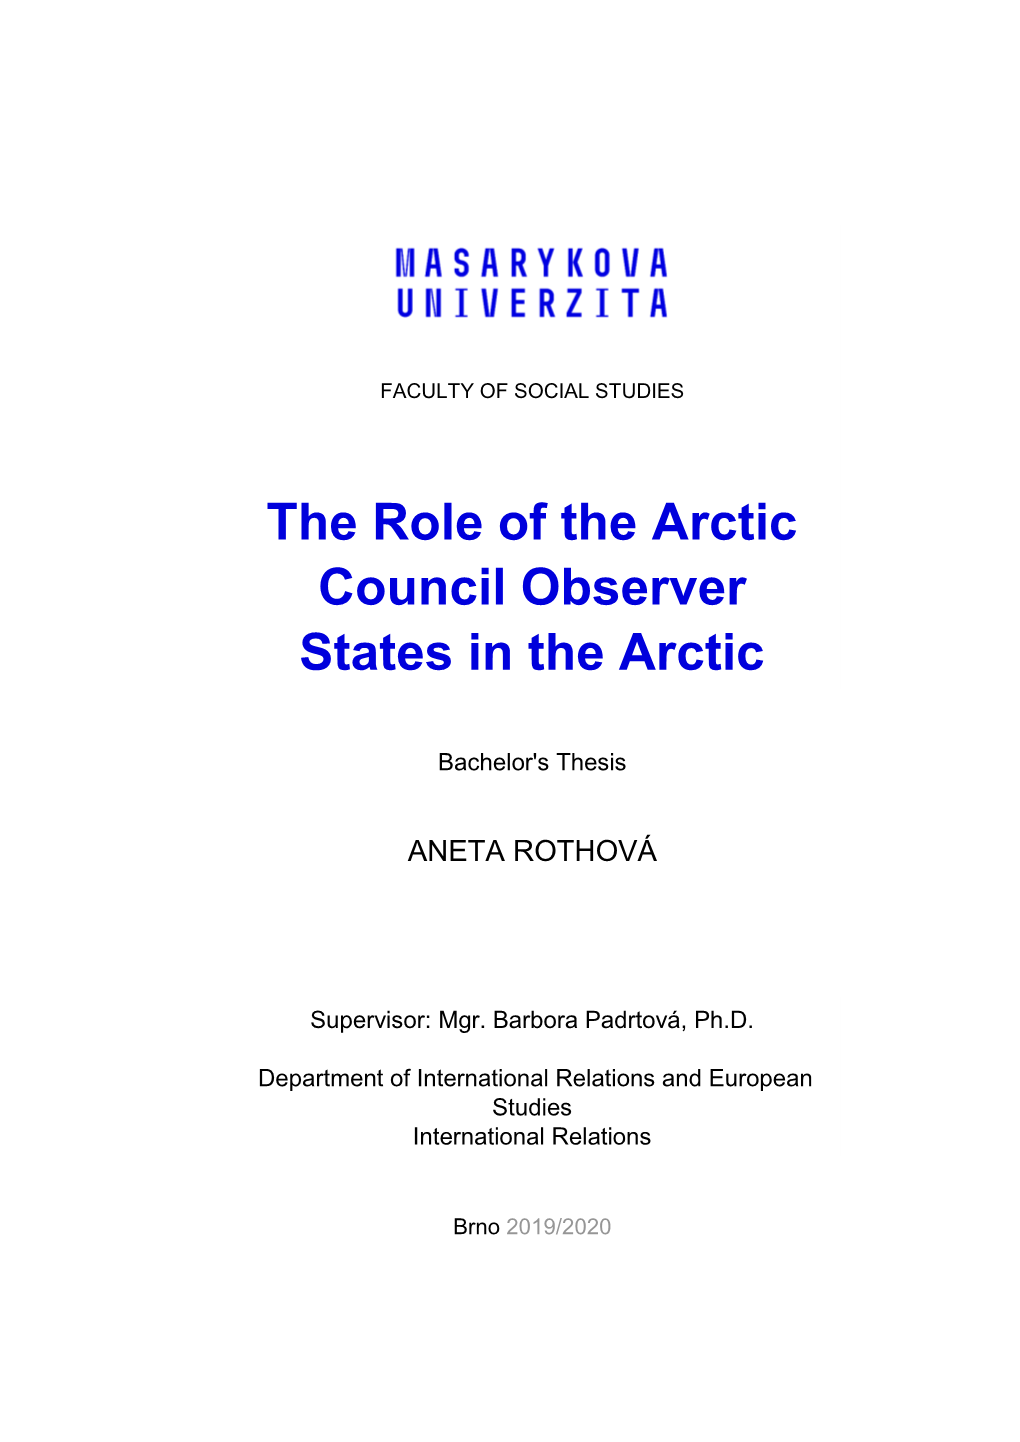 The Role of the Arctic Council Observer States in the Arctic